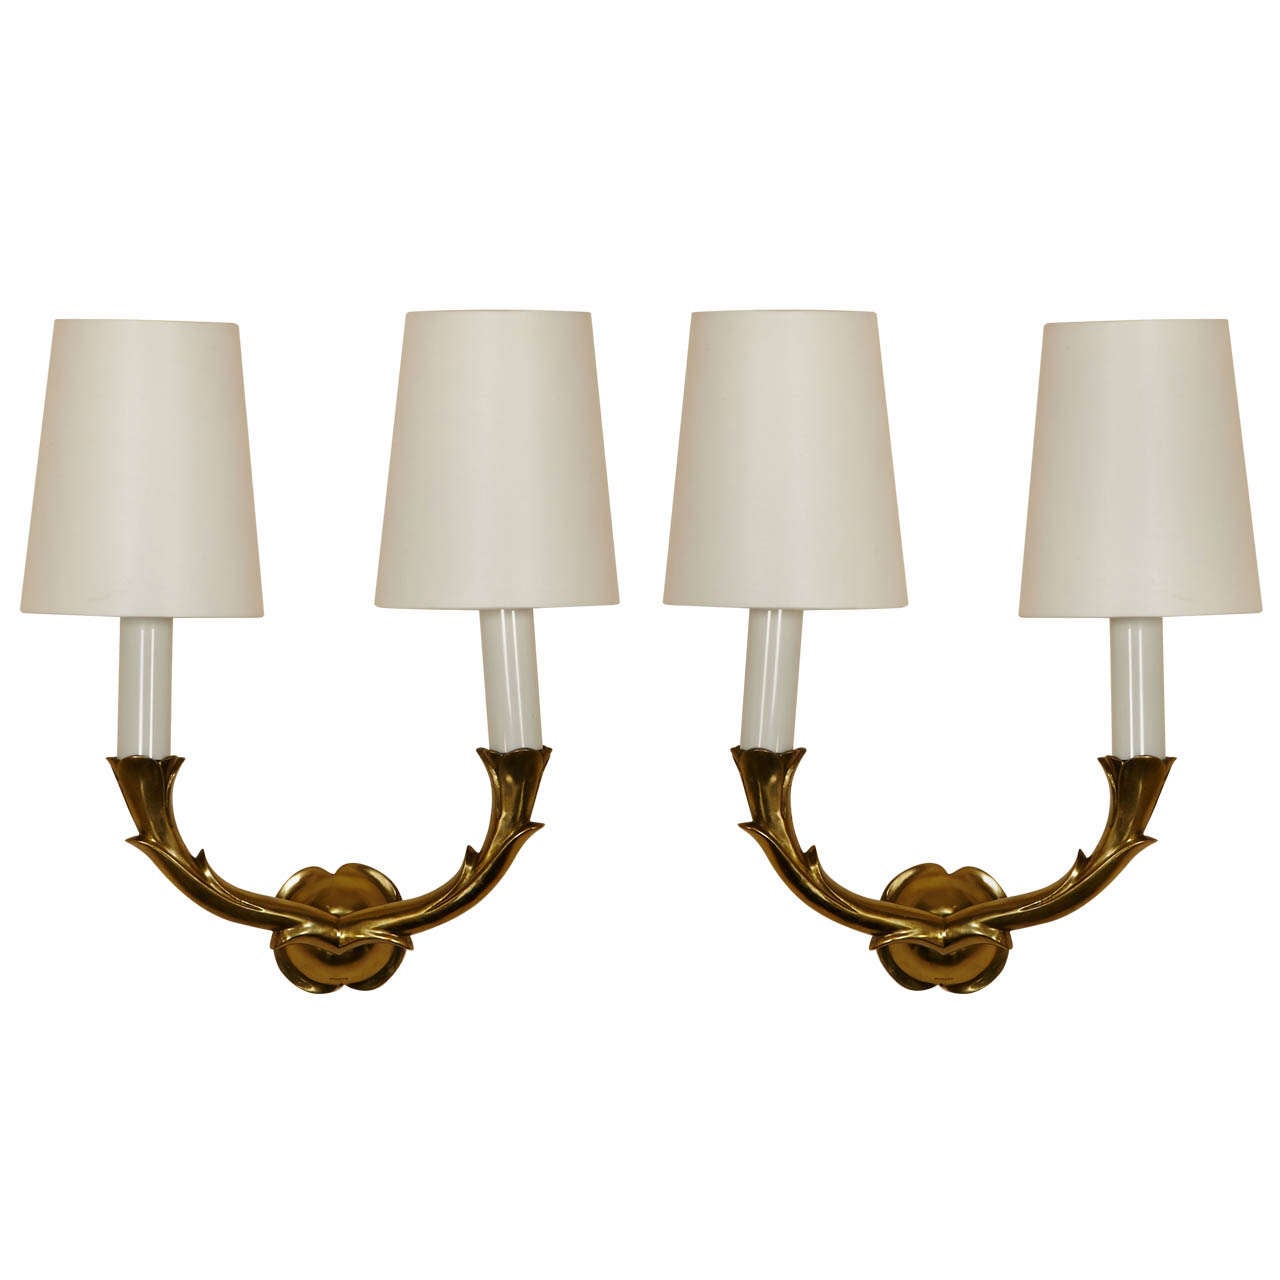 Pair of Bronze Wall Sconces by Riccardo Scarpa, Italy 1950s